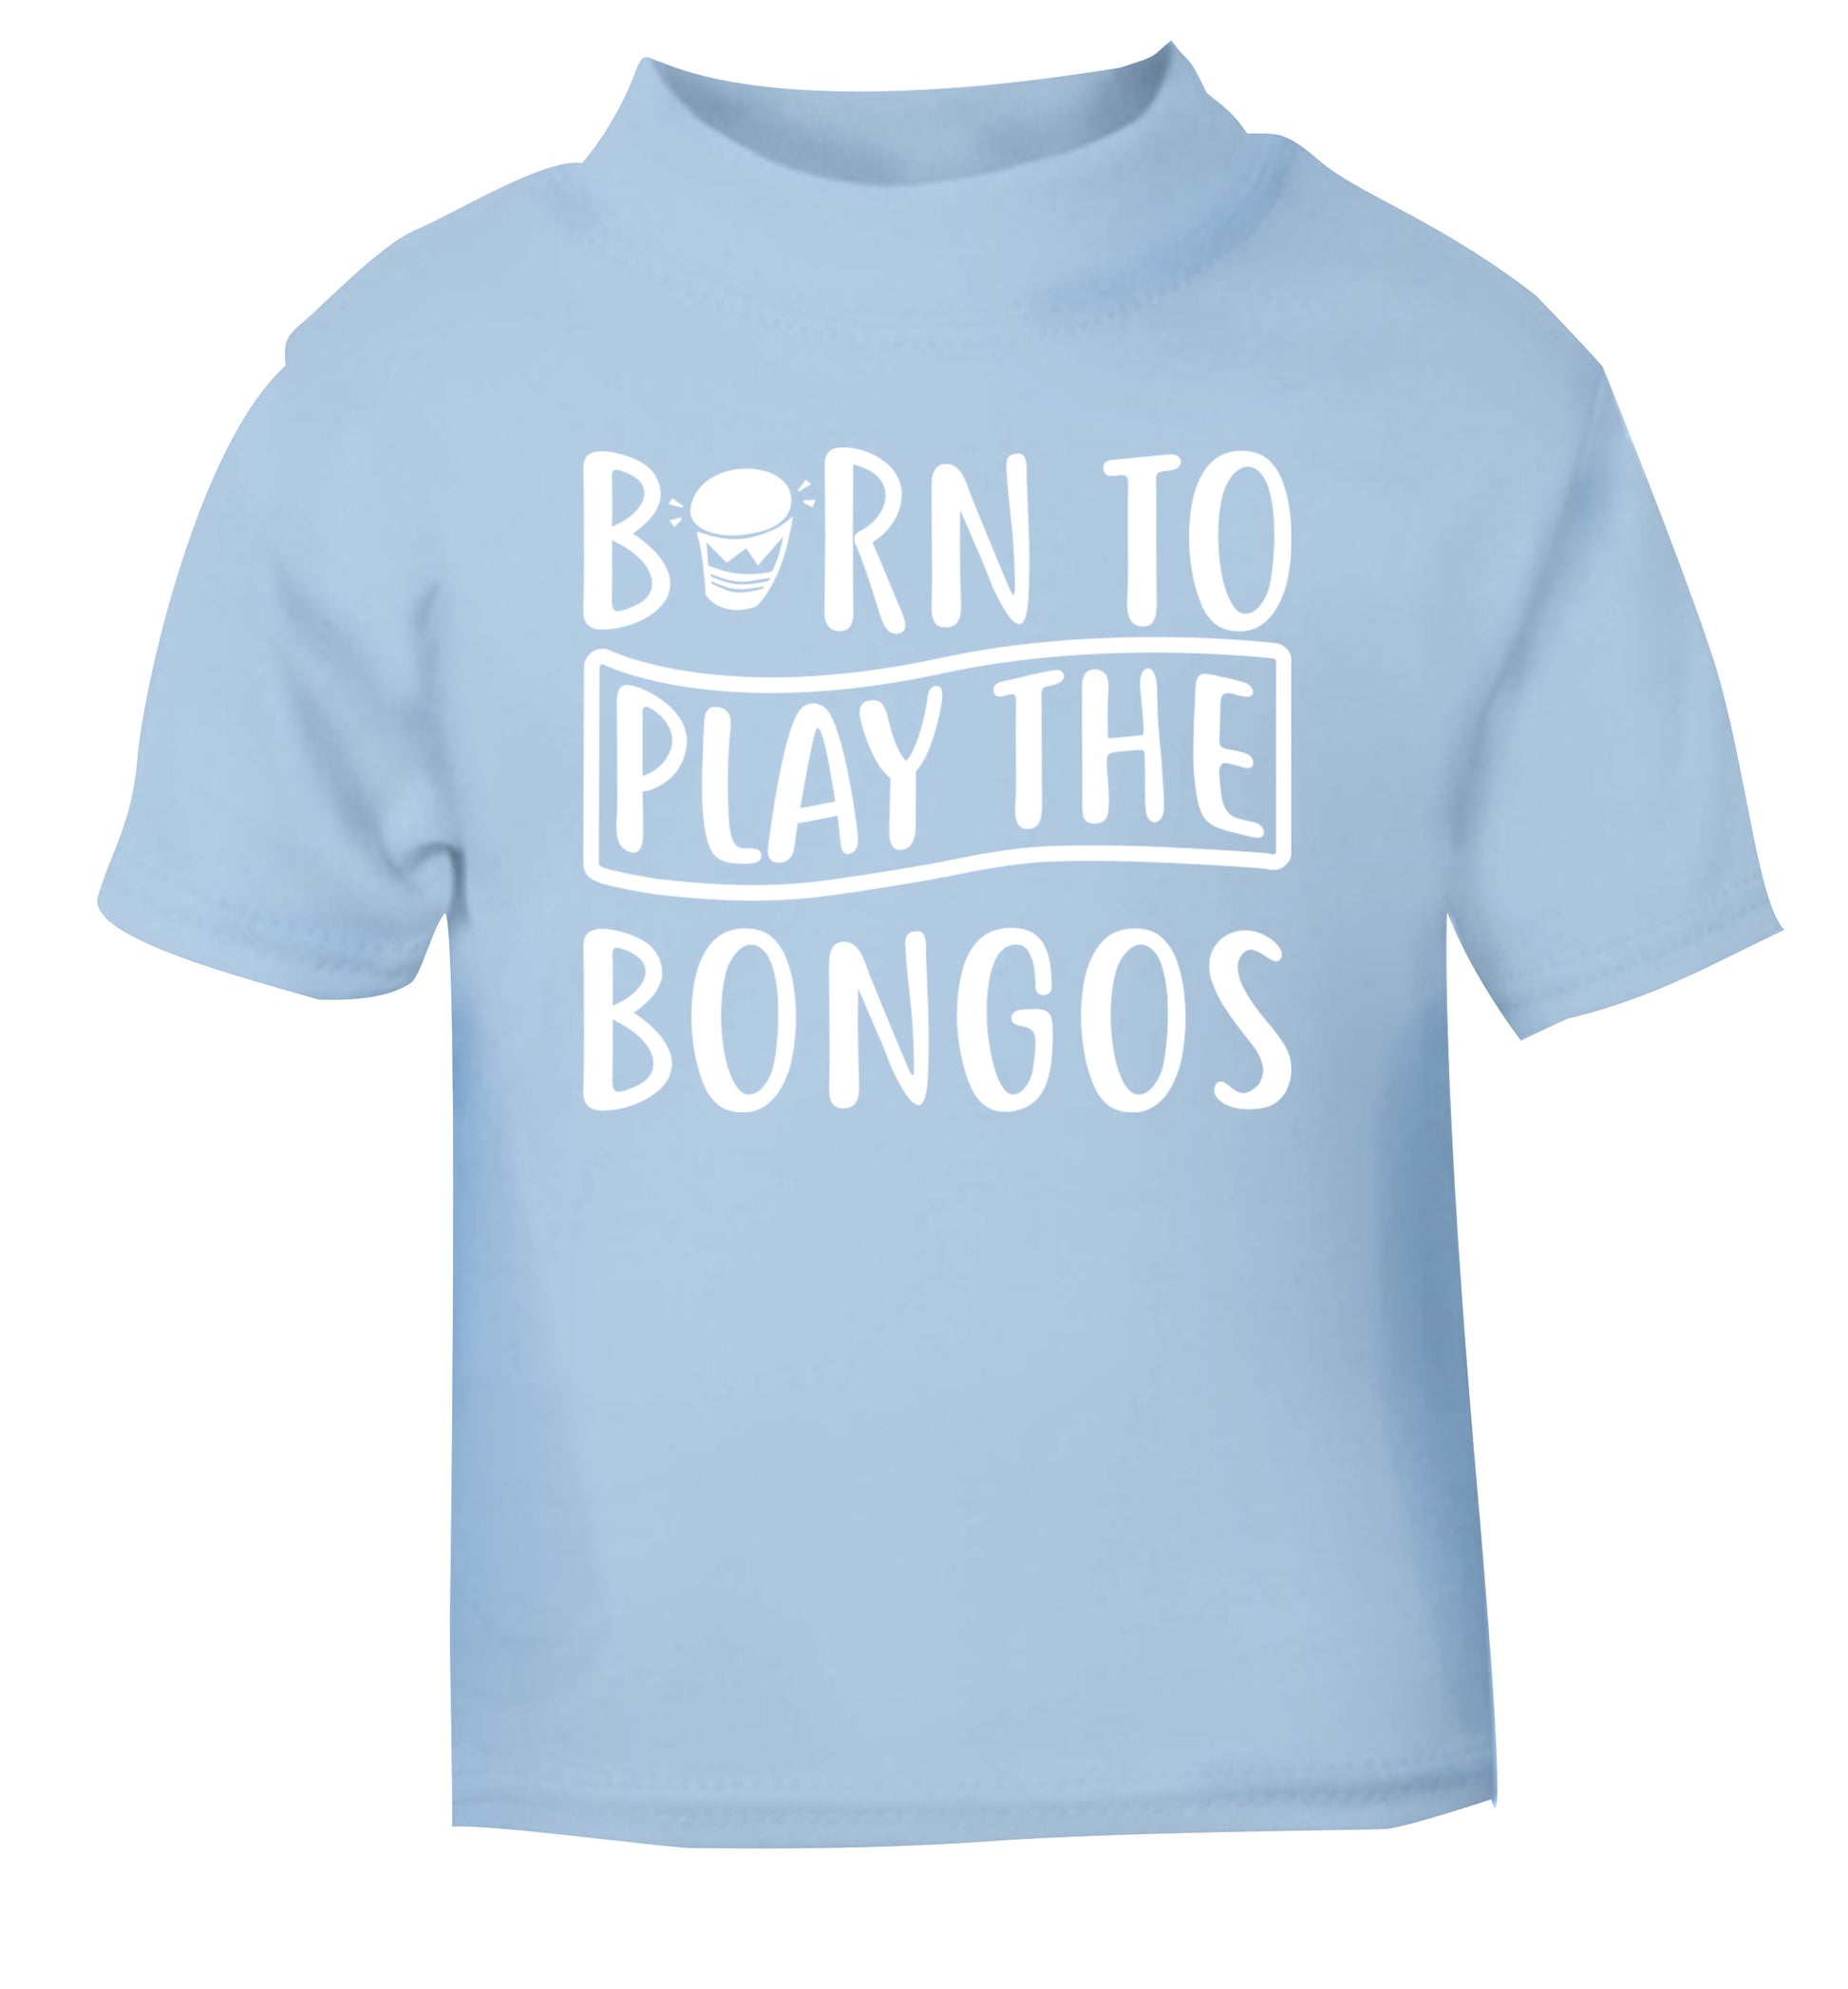 Born to play the bongos light blue Baby Toddler Tshirt 2 Years